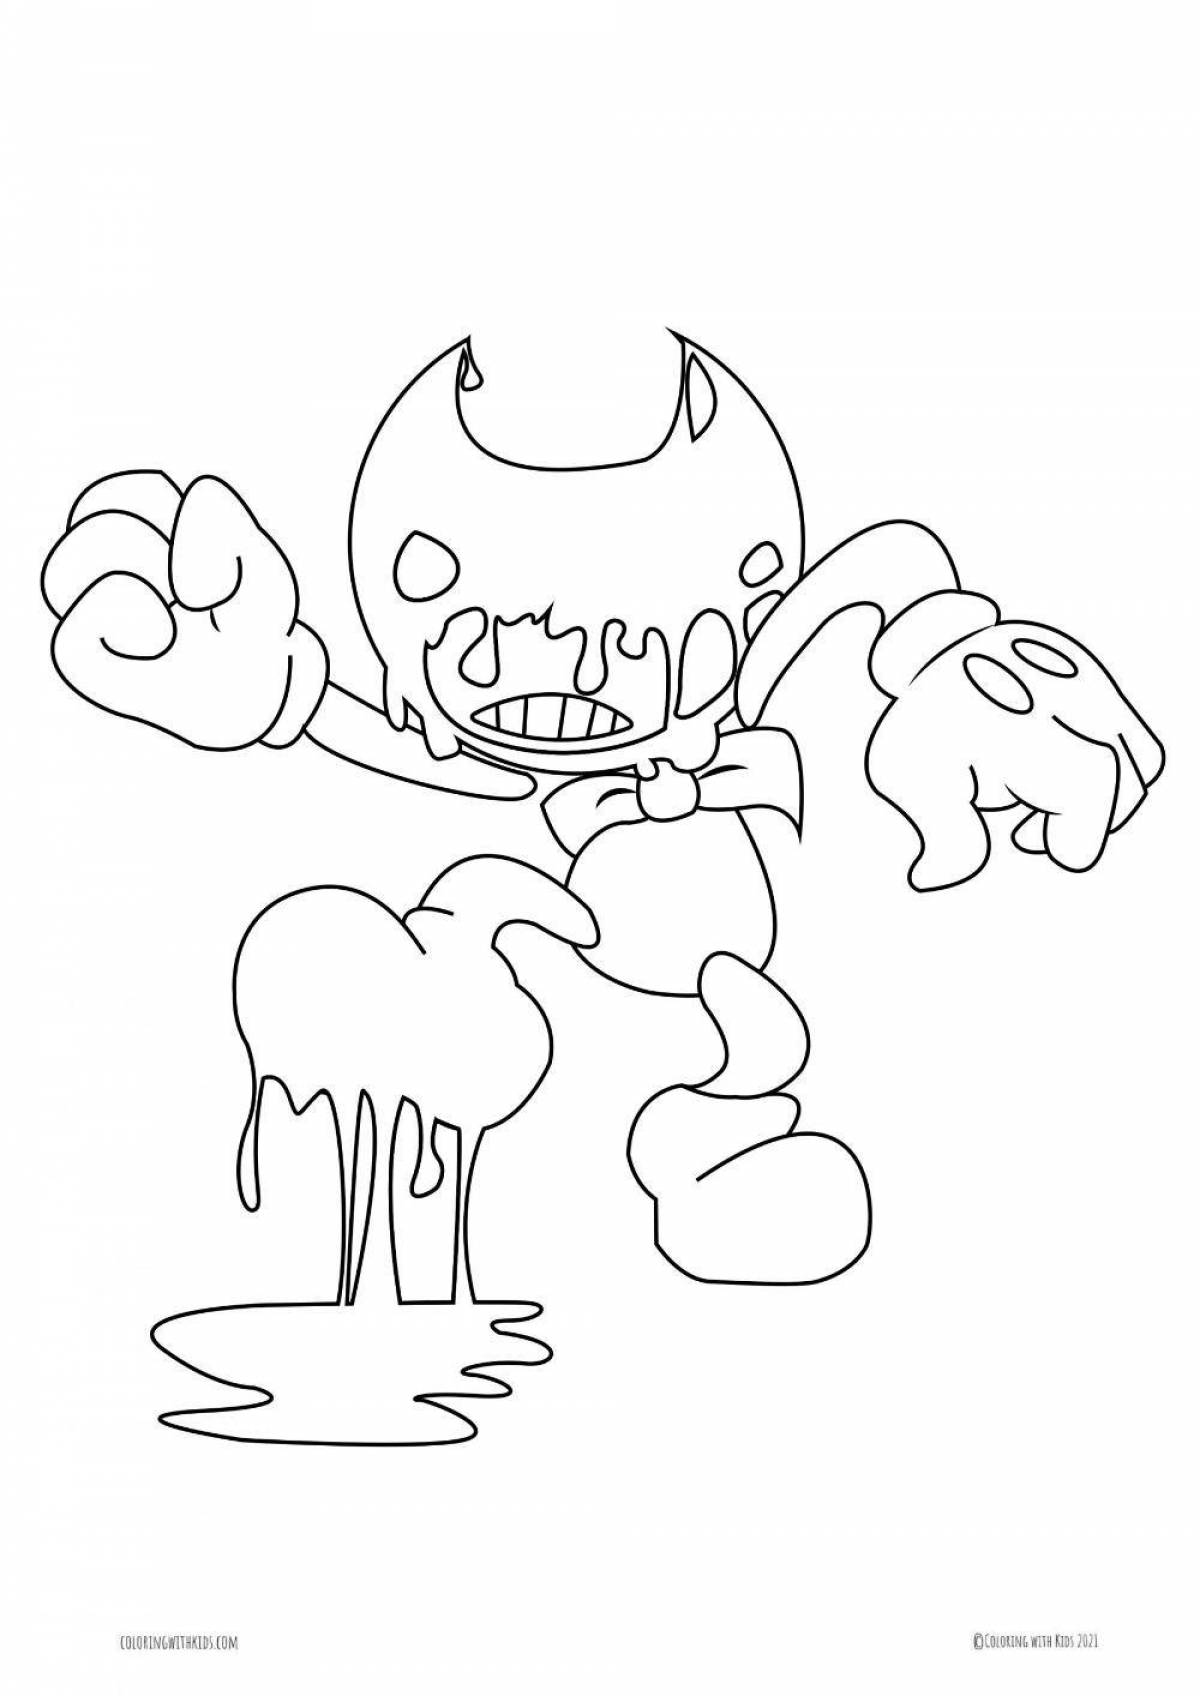 Bendy's scary coloring book